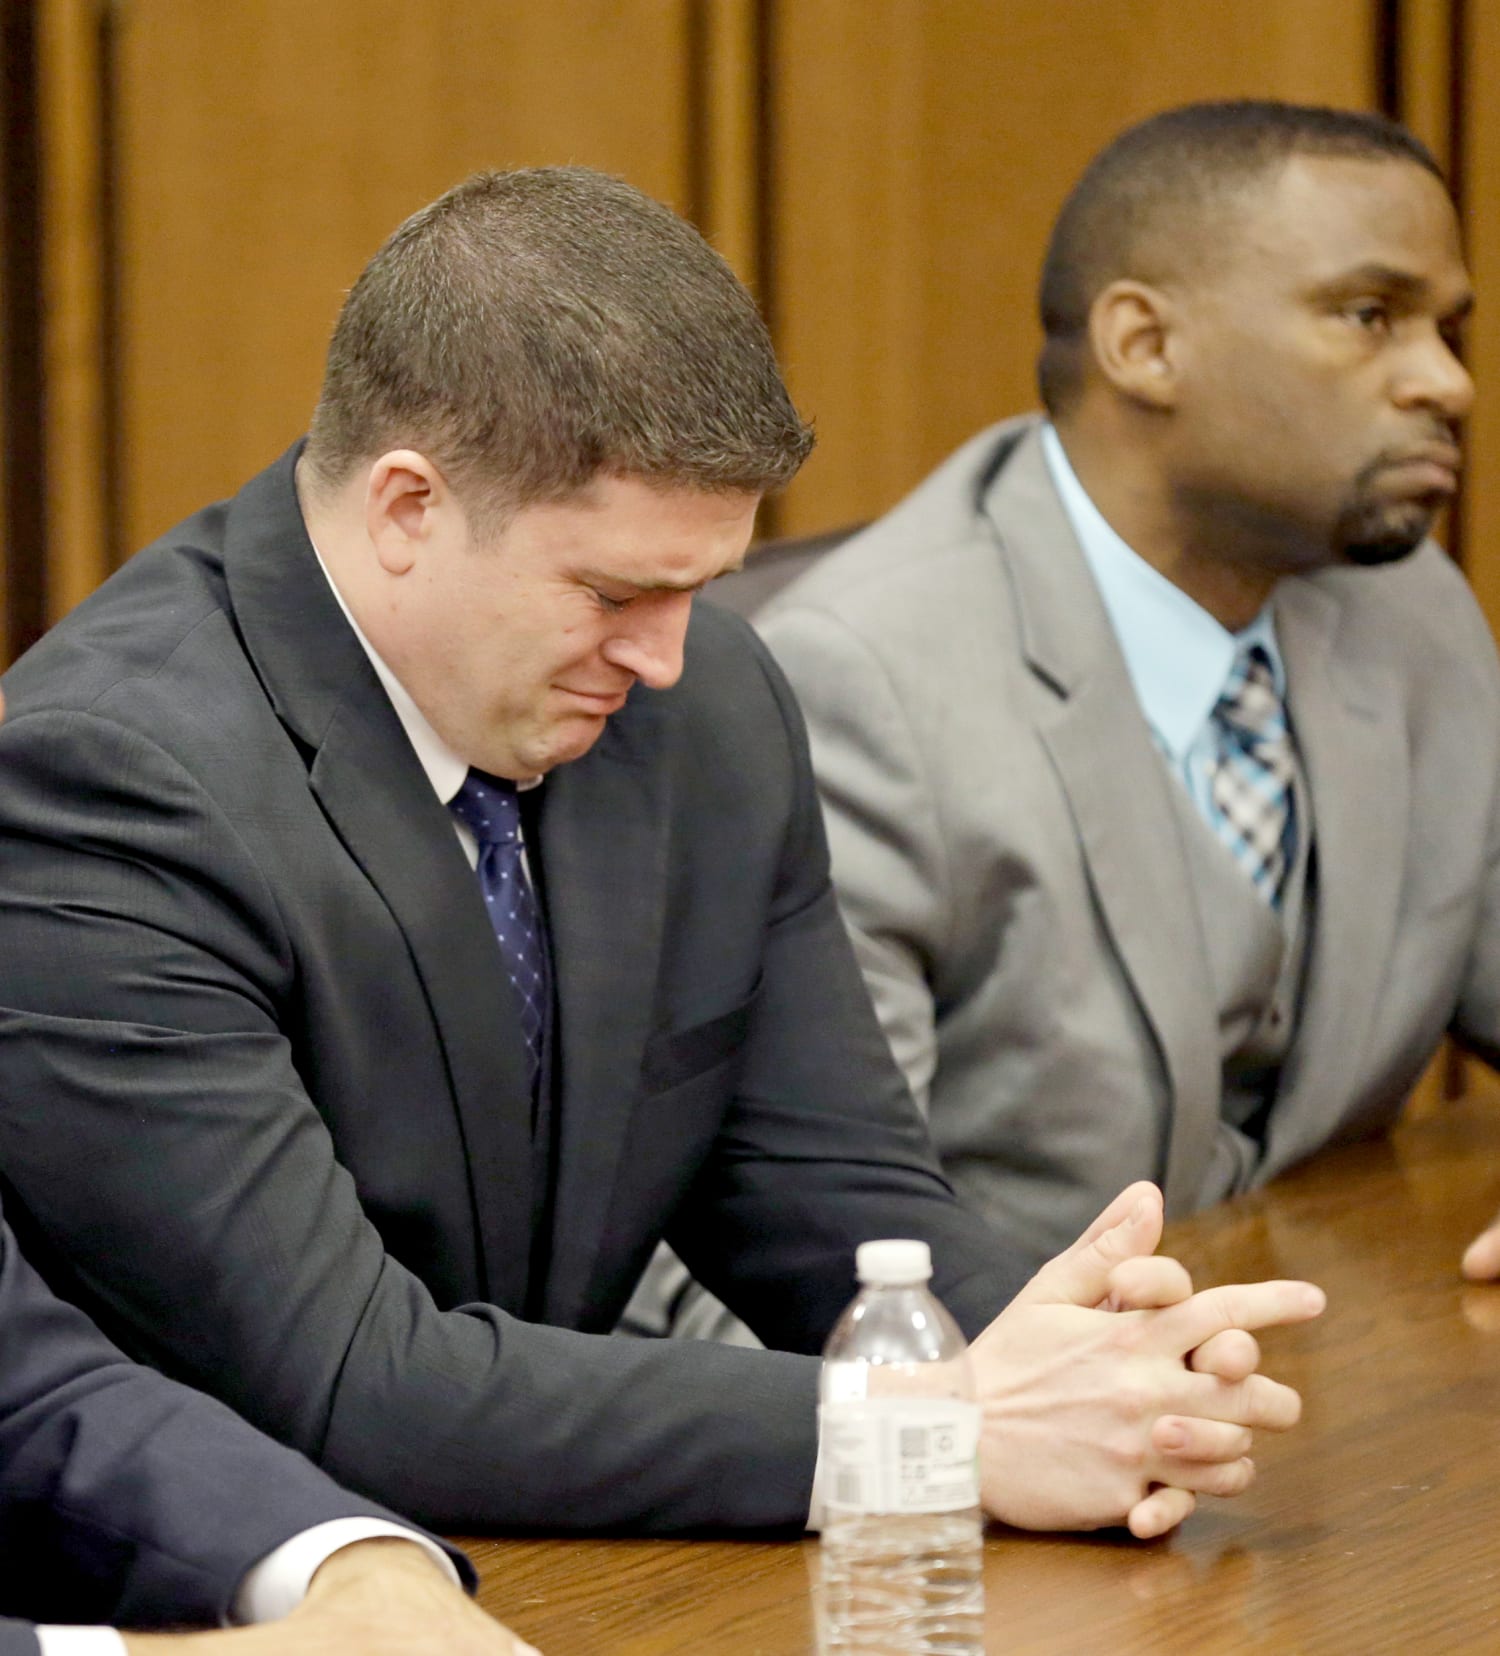 Cleveland Officer Michael Brelo Found Not Guilty in Car Hood.